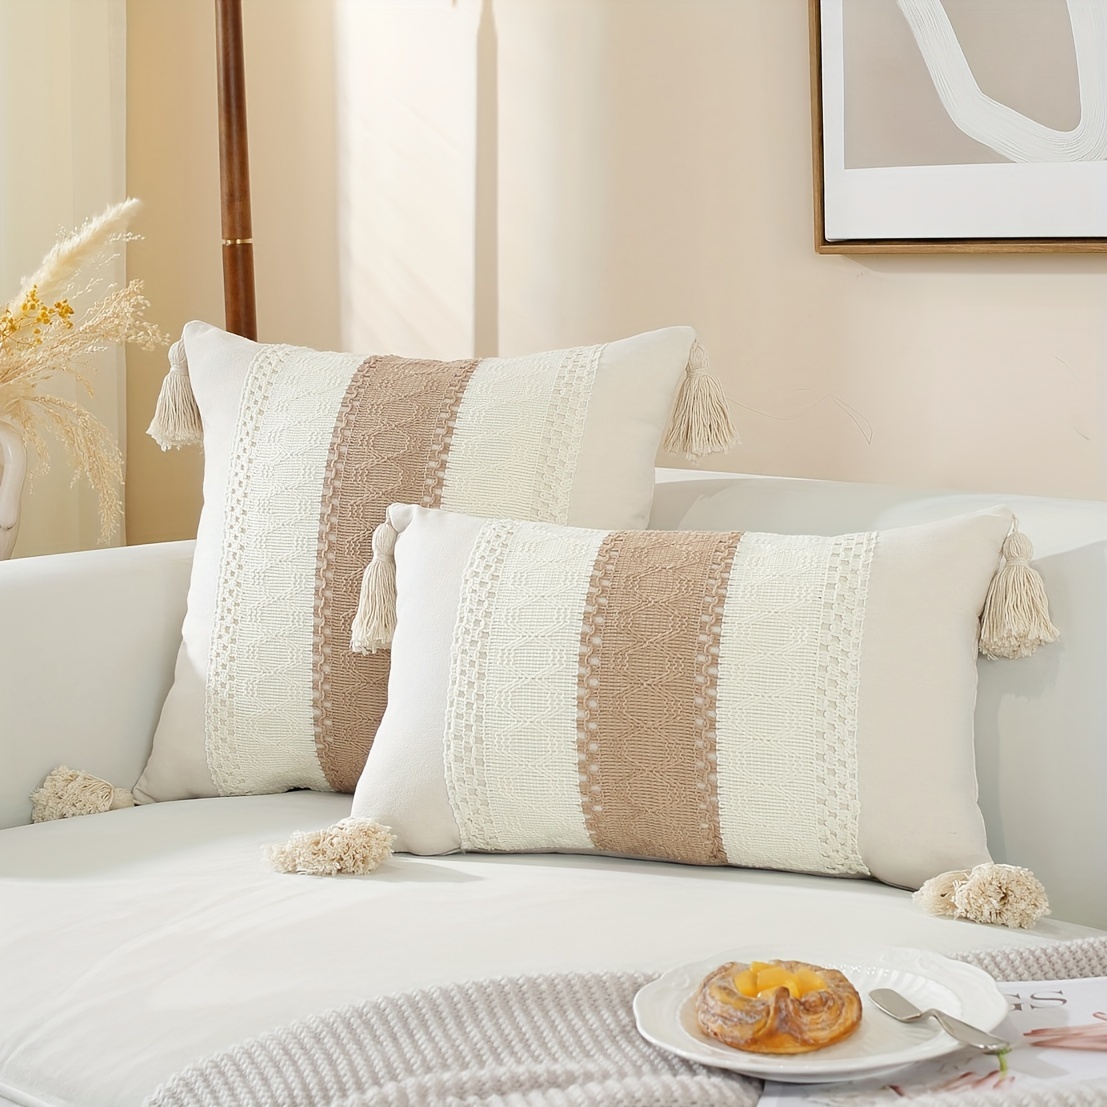 18x18 Neutral Pillow Cover With Tassels, Farmhouse Pillow